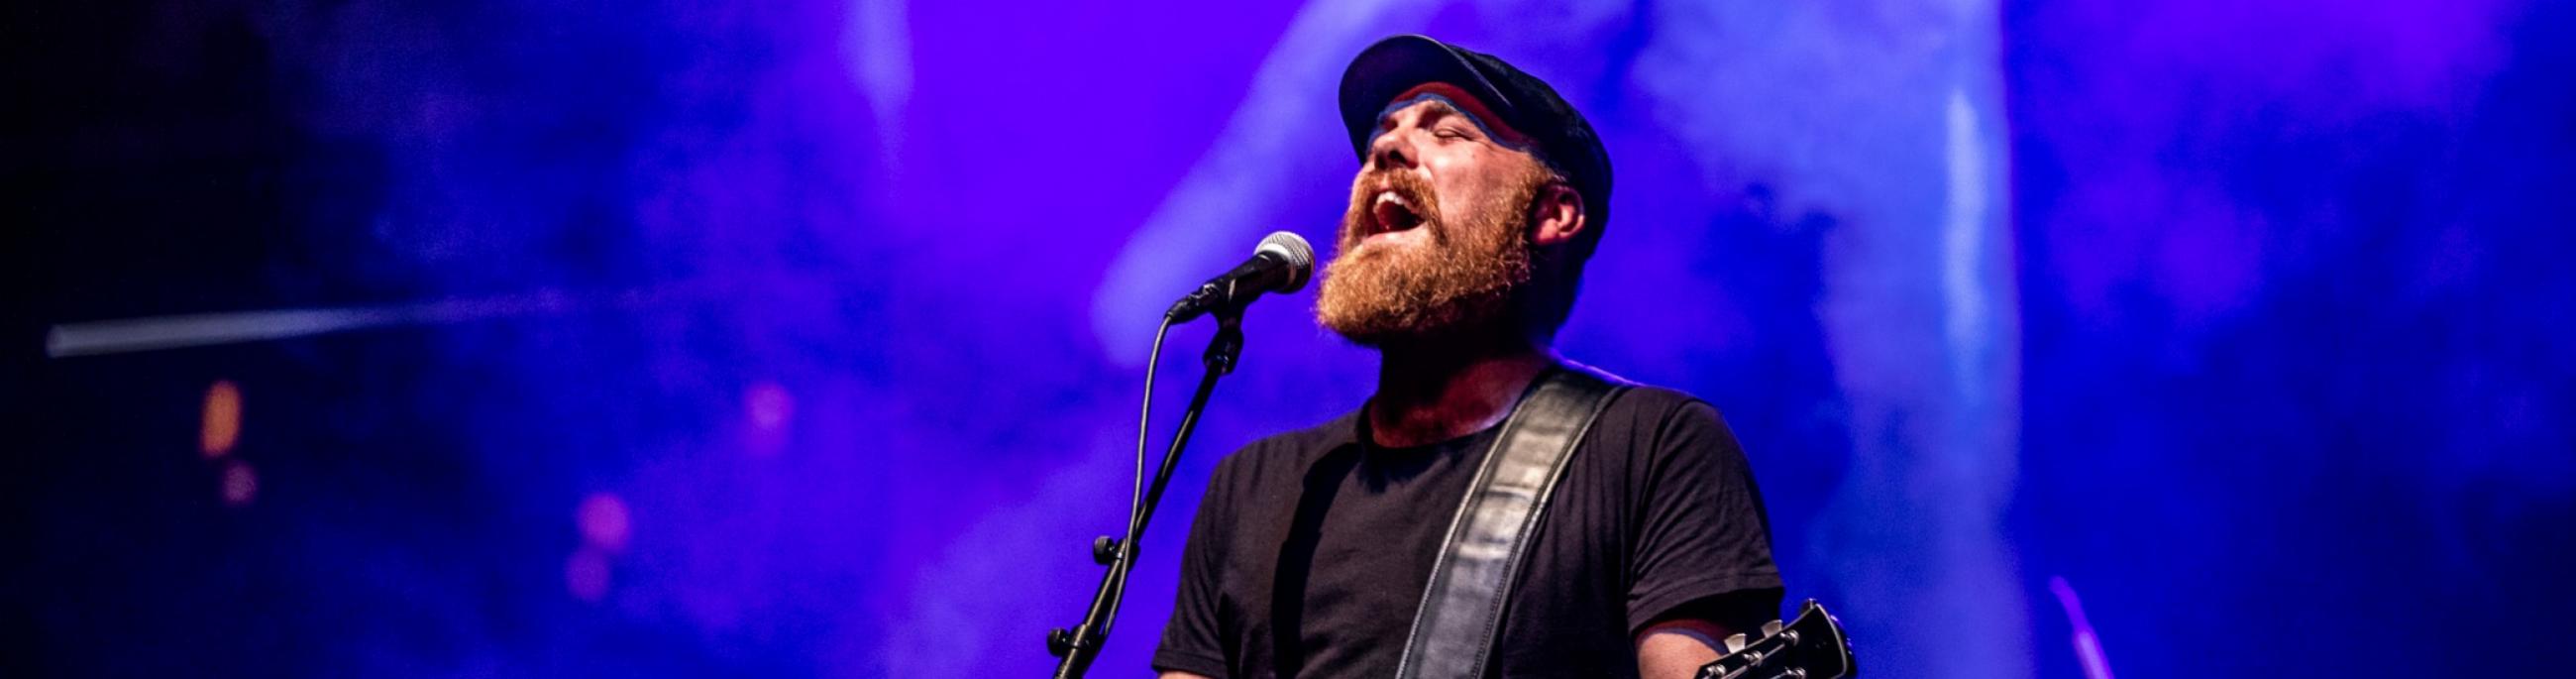 A man with a beard and black drivers cap, sings into a microphone and plays guitar